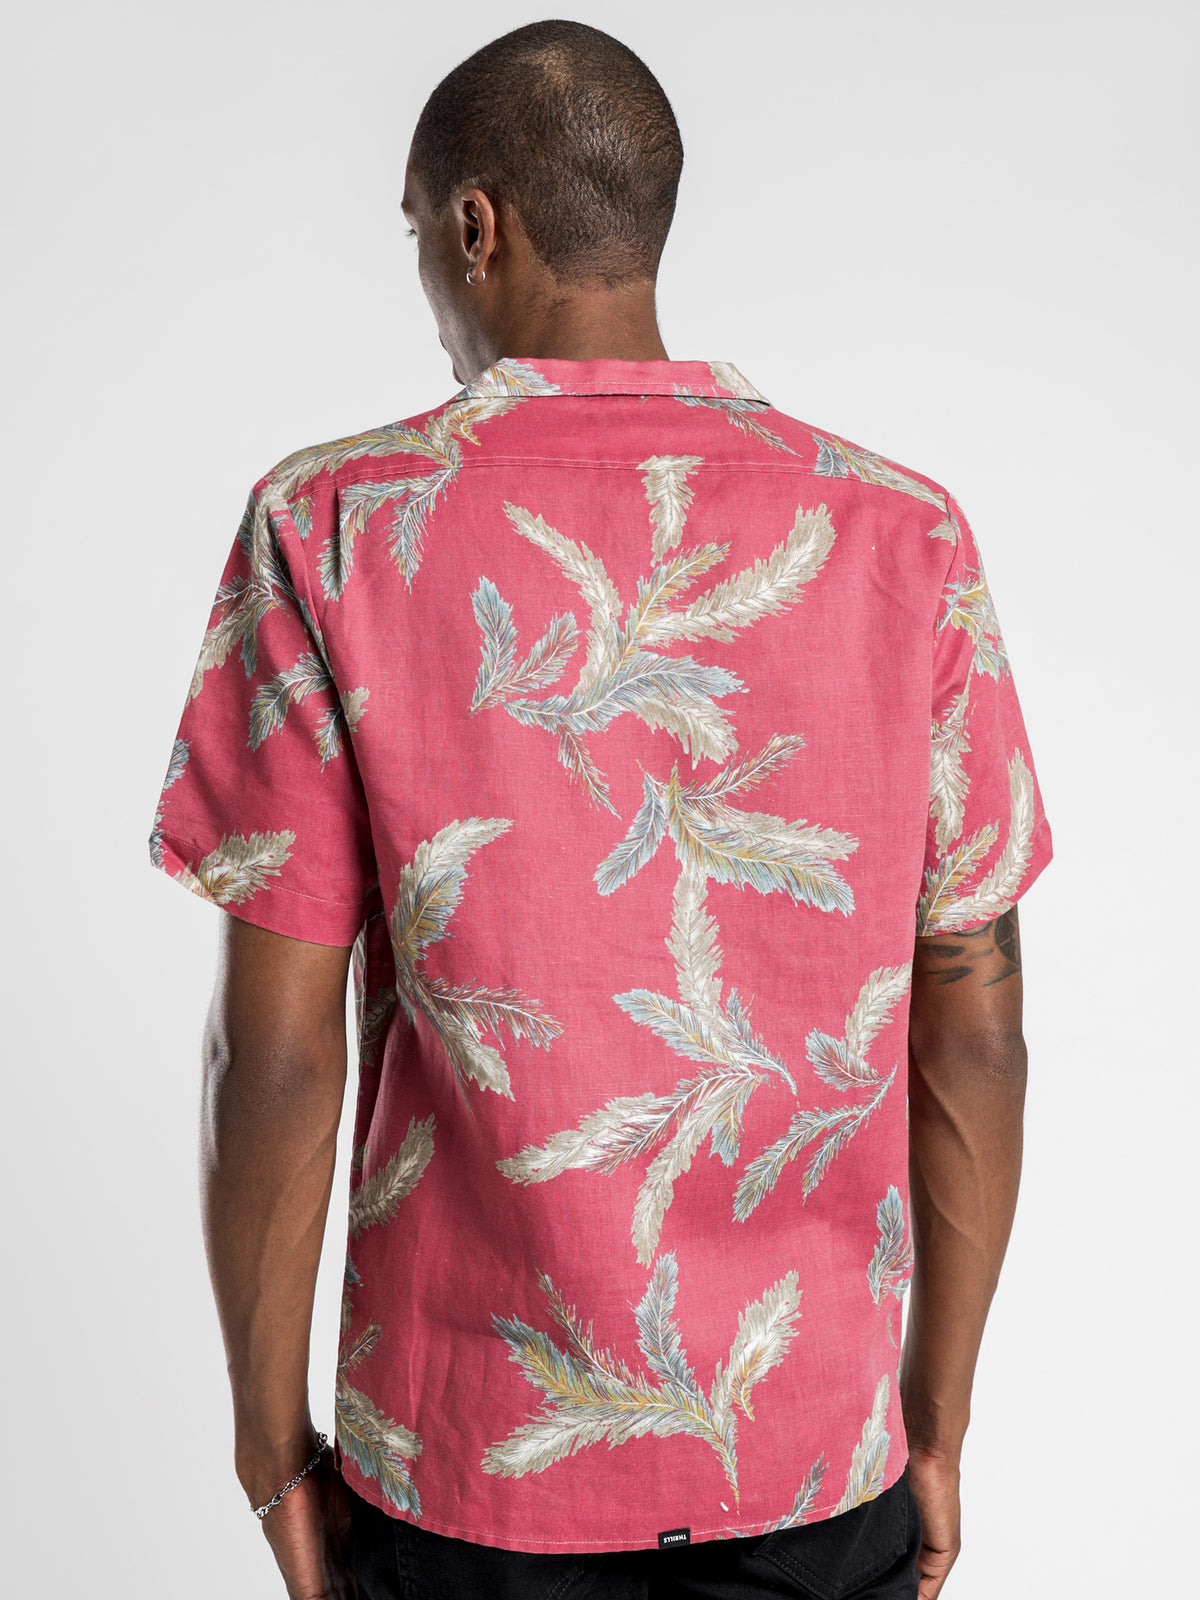 Feathered Bowling Shirt in Red Wine Palm Print